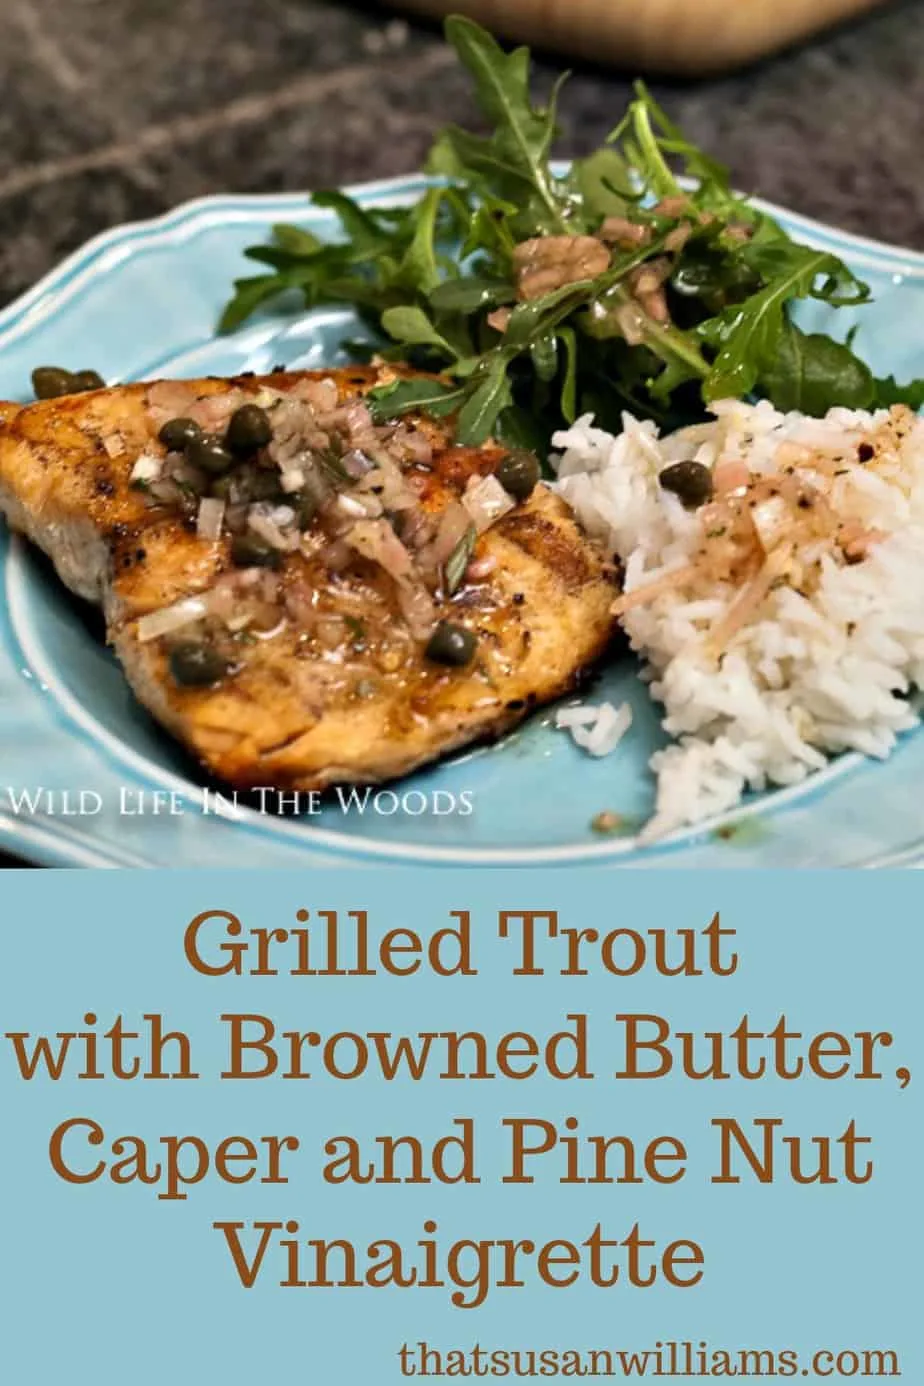 Grilled Trout with Browned Butter, Caper and Pine Nut Vinaigrette